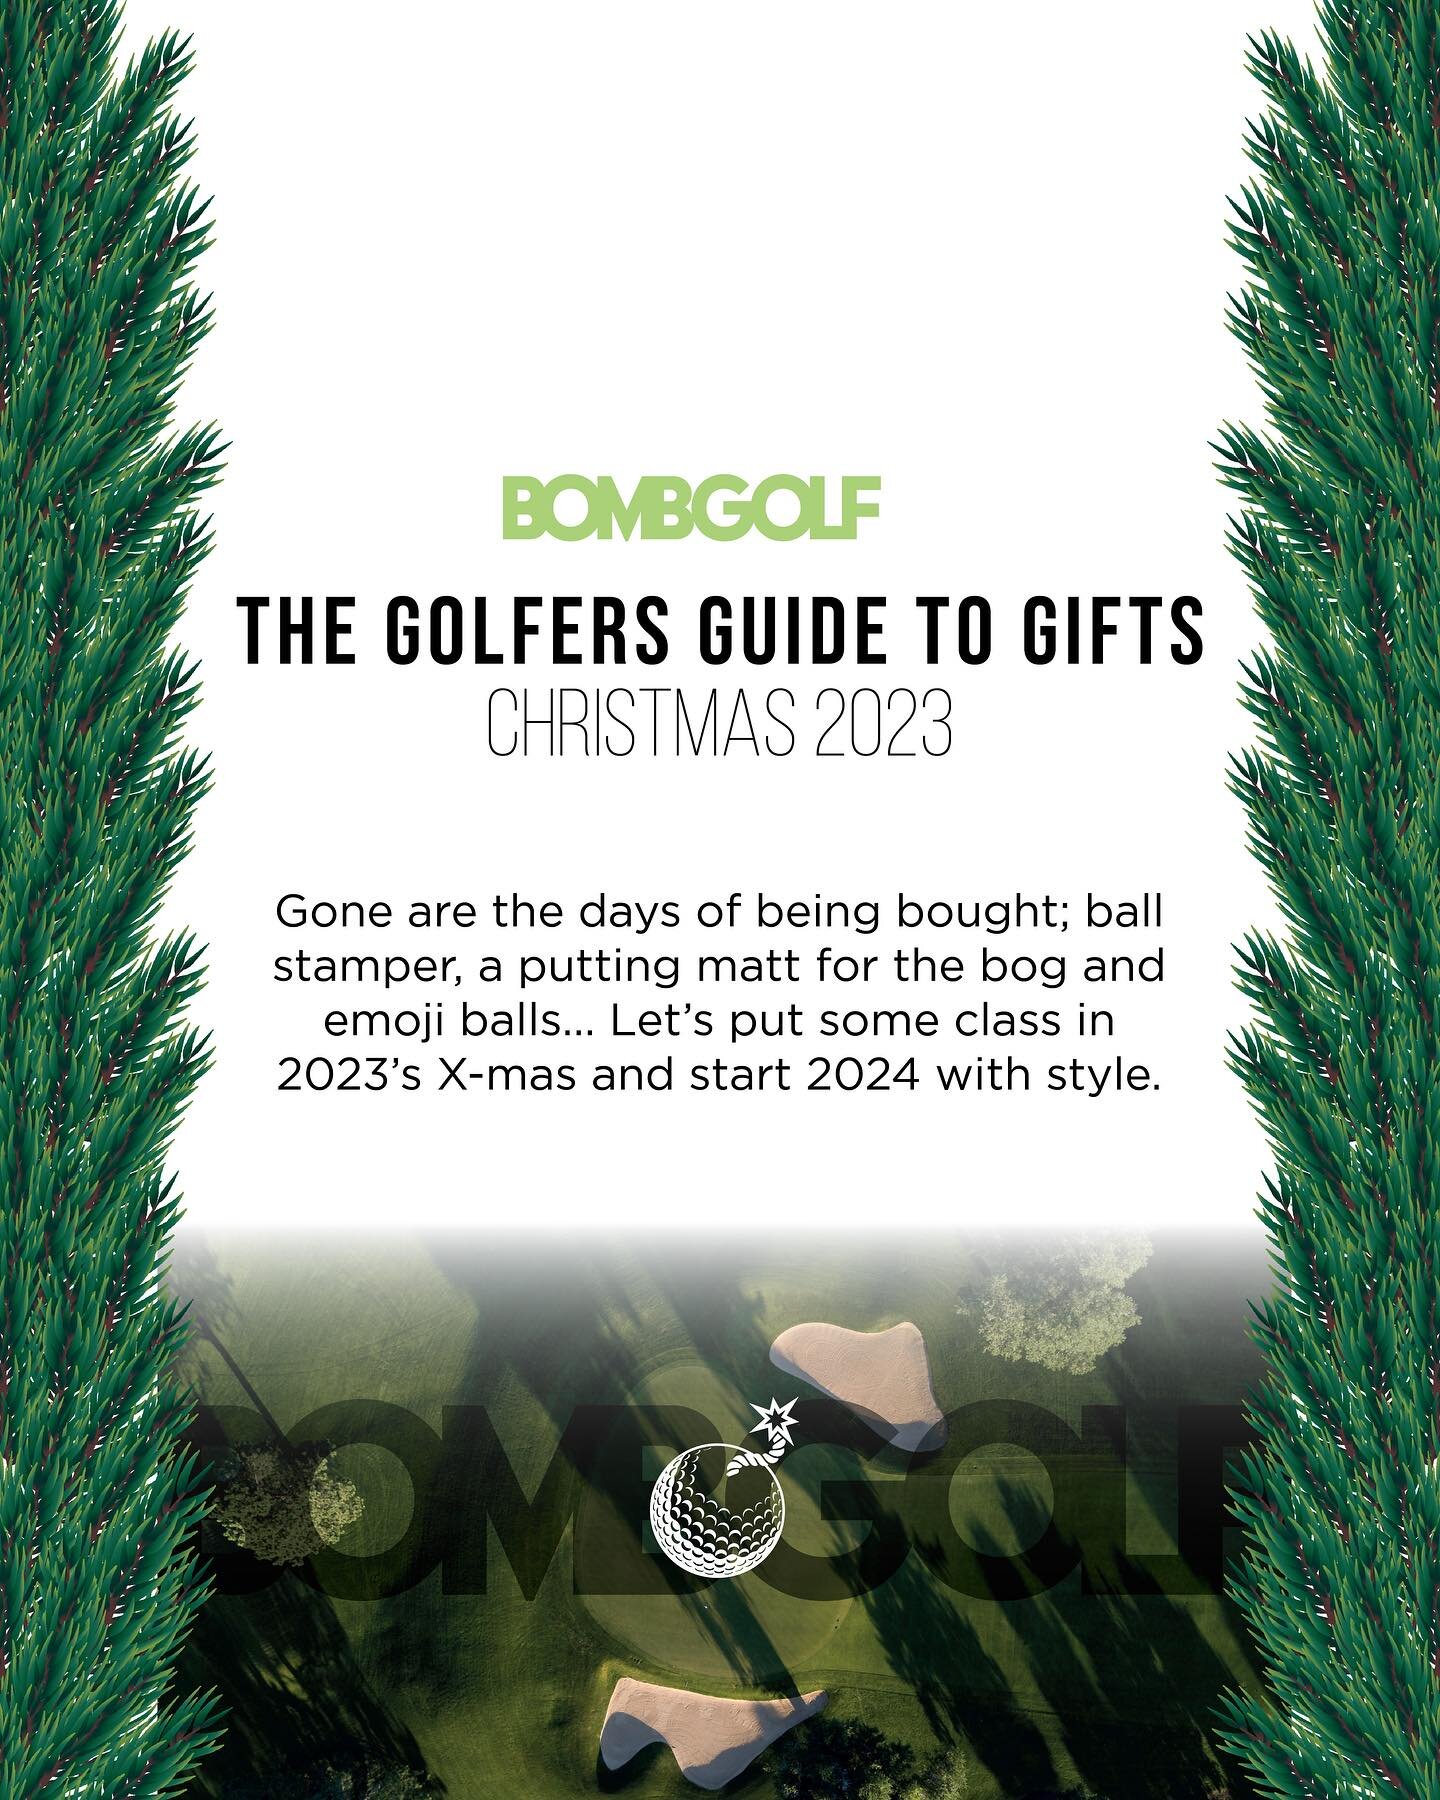 The a PERFECT guide to a Golfers&rsquo; Christmas gifts 🎁

If you have a golf lover in your family, but not sure what to get them&hellip; Take some inspiration from this handy list and you&rsquo;ll be sure to put a smile on their faces 🎅
.
.
.
.
.
